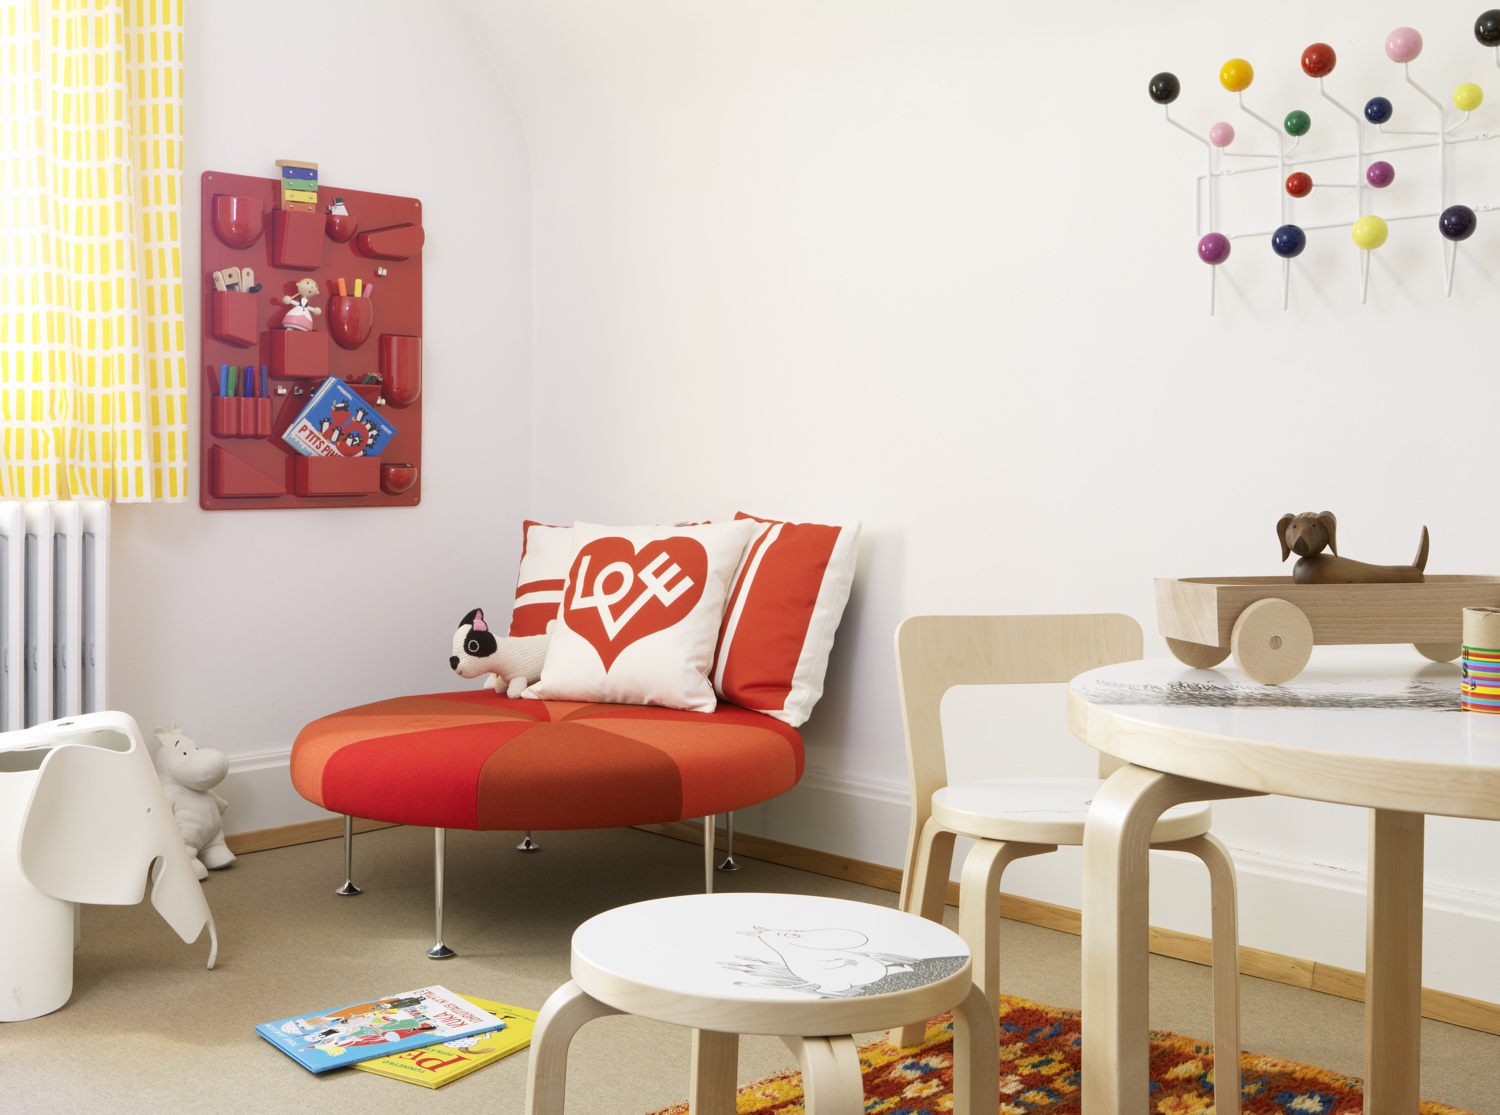 Colour Wheel Ottoman designed by Alexander Girard in 1967 (pictured in a Hopsak red mix). 'Love' graphic print pillow by Alexander Girard. Uten.Silo II (in classic red) designed by Dorothee Becker in 1969.